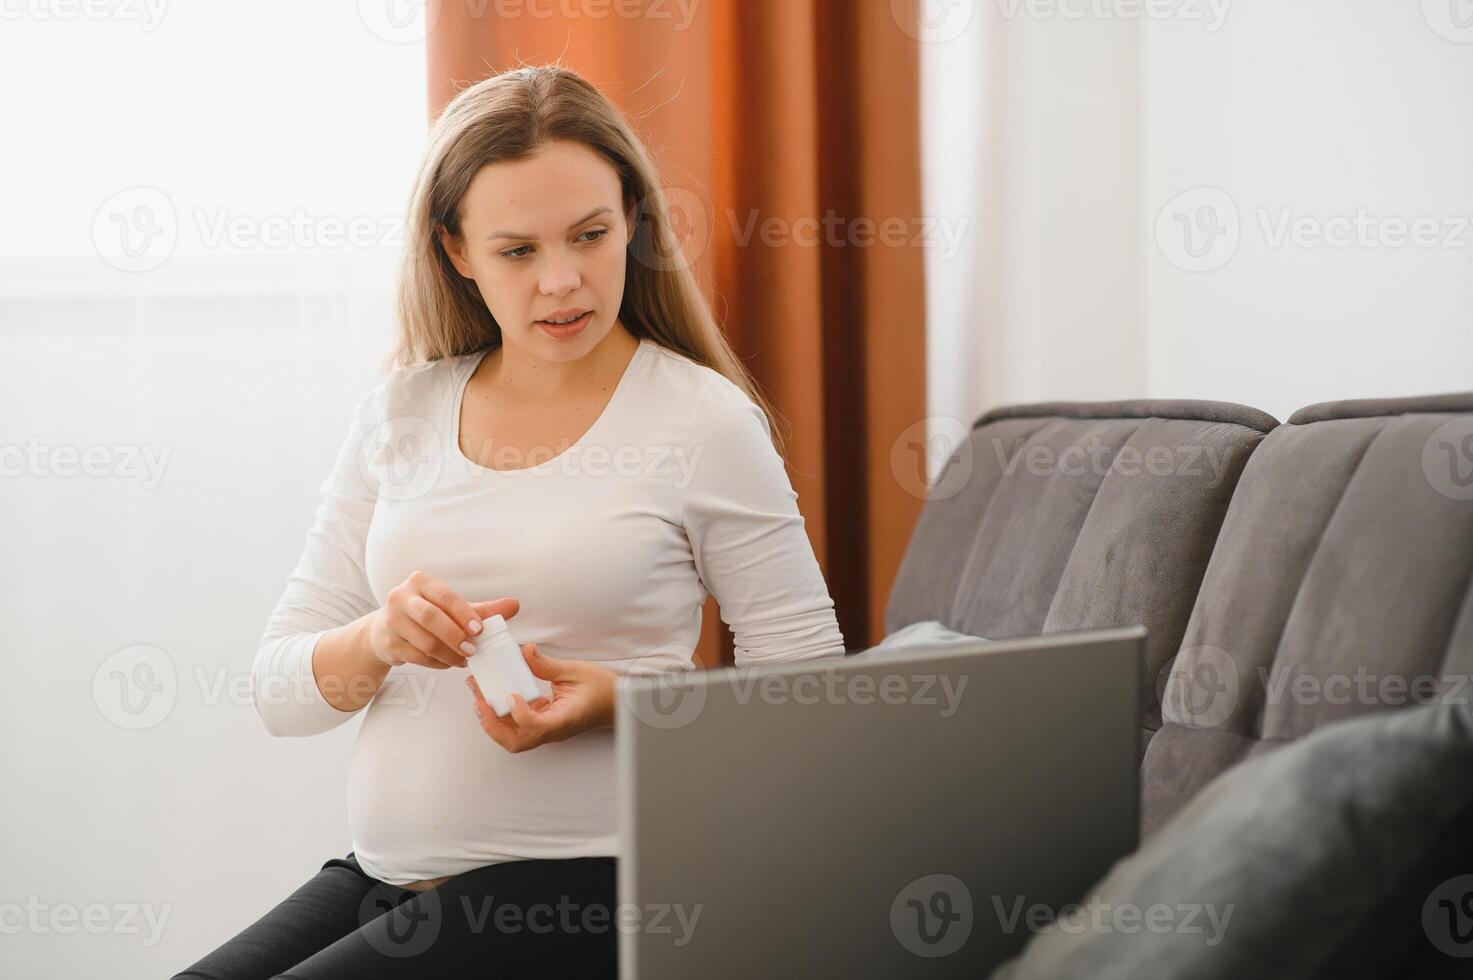 Pregnant woman video chatting with doctor on laptop. Professional medical online consultation concept. photo